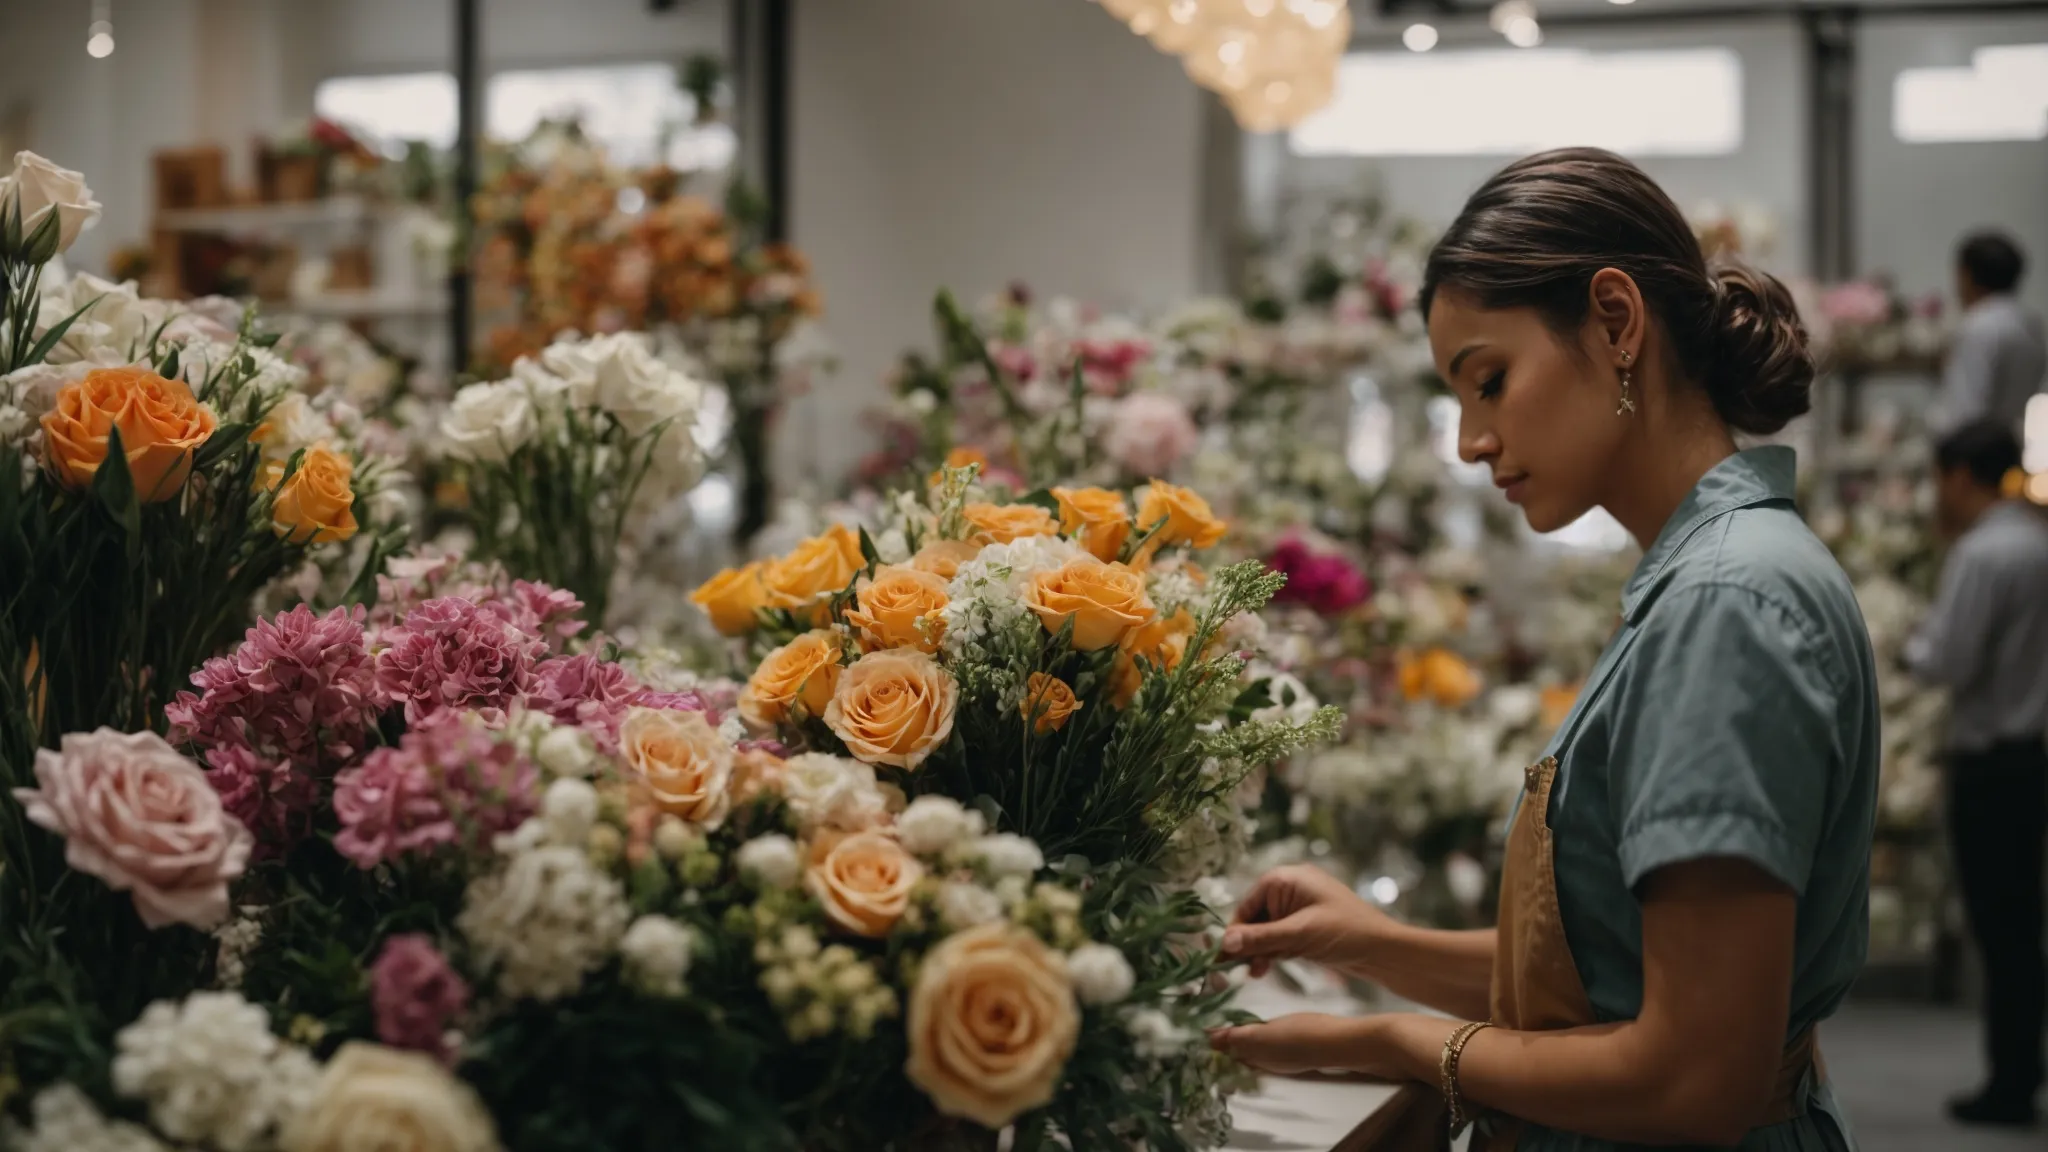 a person customizing flower arrangements in a boutique filled with various types of blooms.